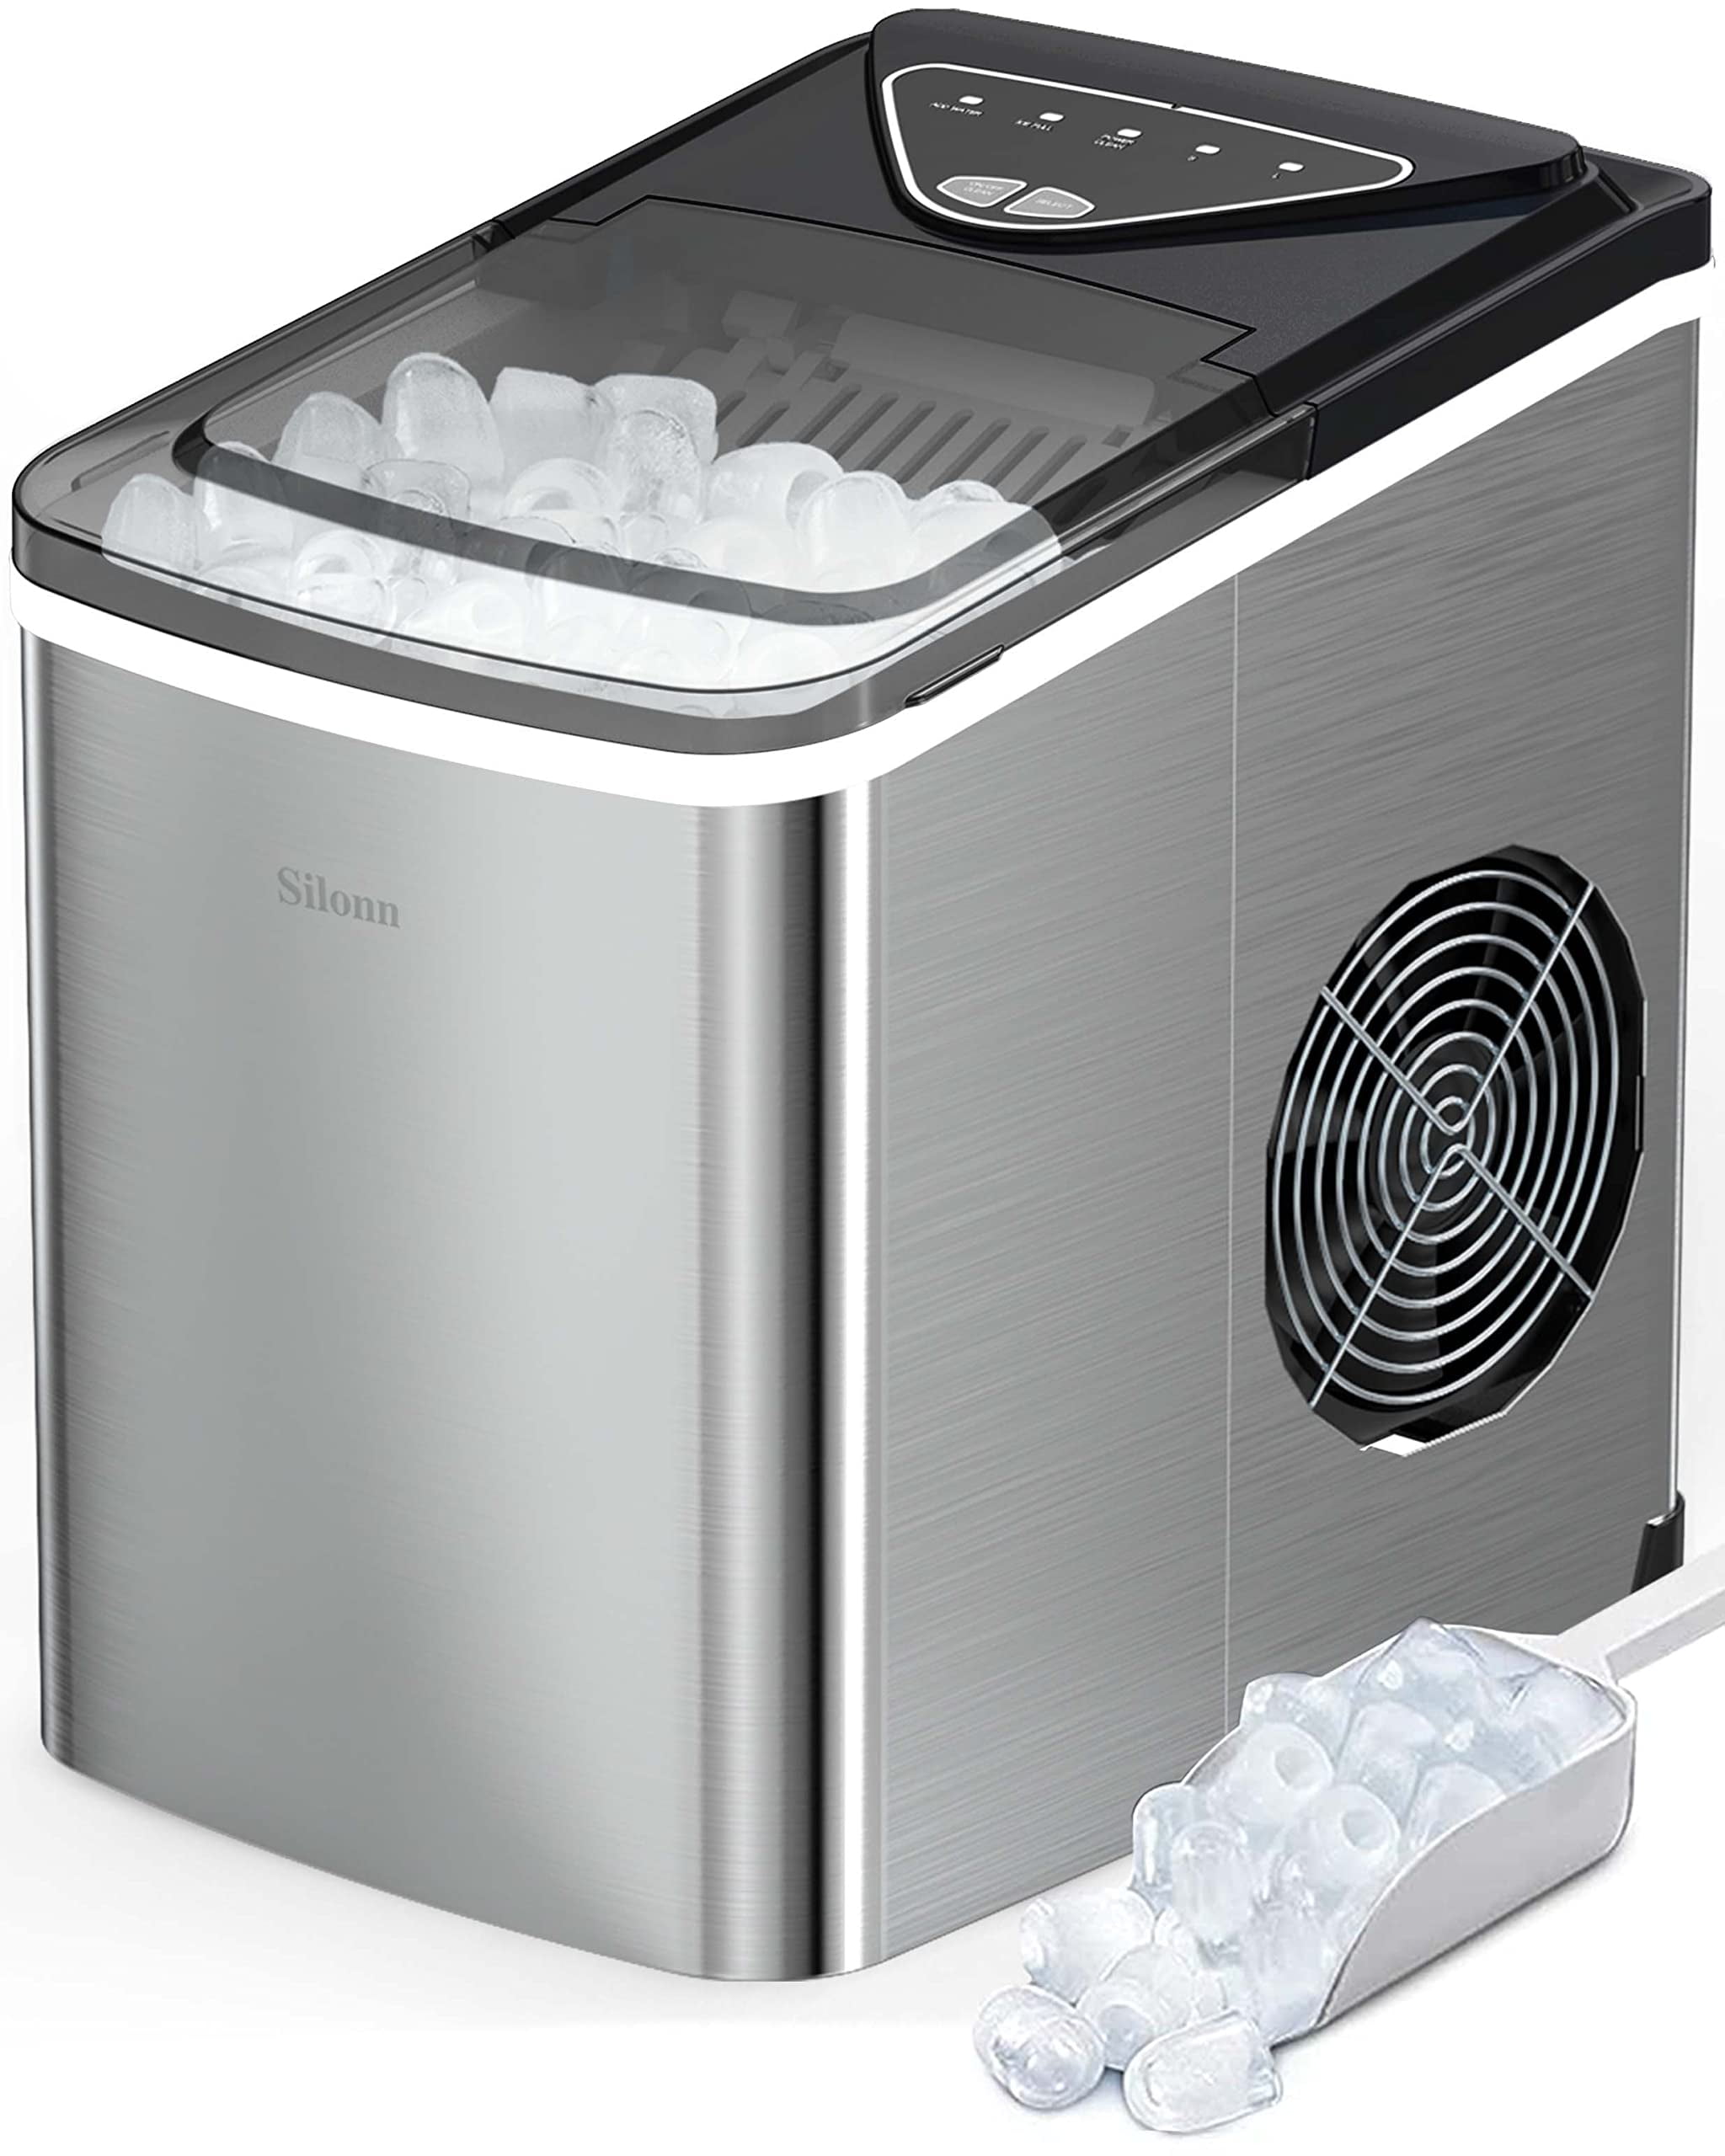  Crzoe Ice Makers Countertop, Ice Machine with Handle, 26Lbs in  24Hrs, 9 Cubes Ready in 6 Mins, Self-Cleaning Portable Ice Maker, 2 Sizes  of Bullet Ice Cubes for Home and Office 